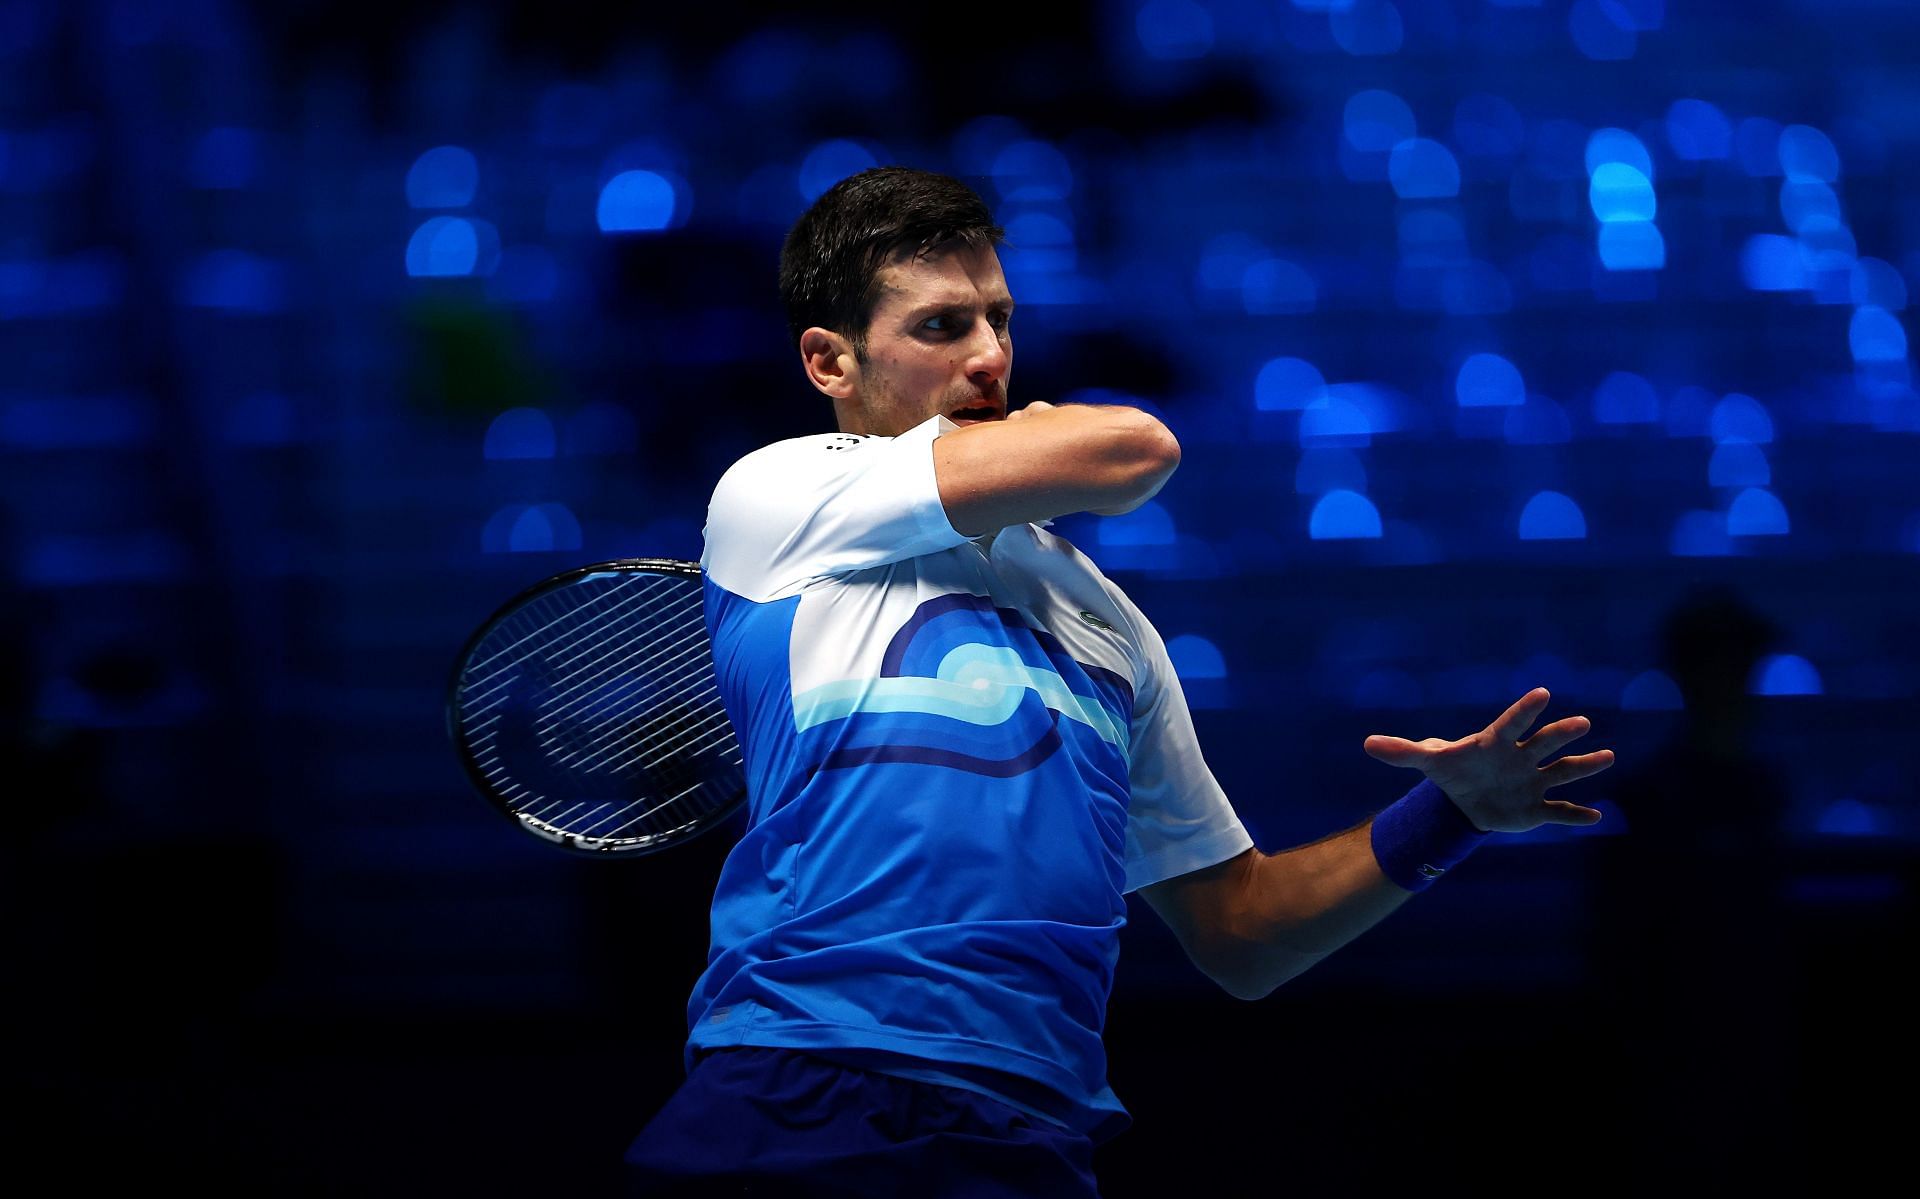 Novak Djokovic during his win over Cameron Norrie at the 2021 Nitto ATP World Tour Finals